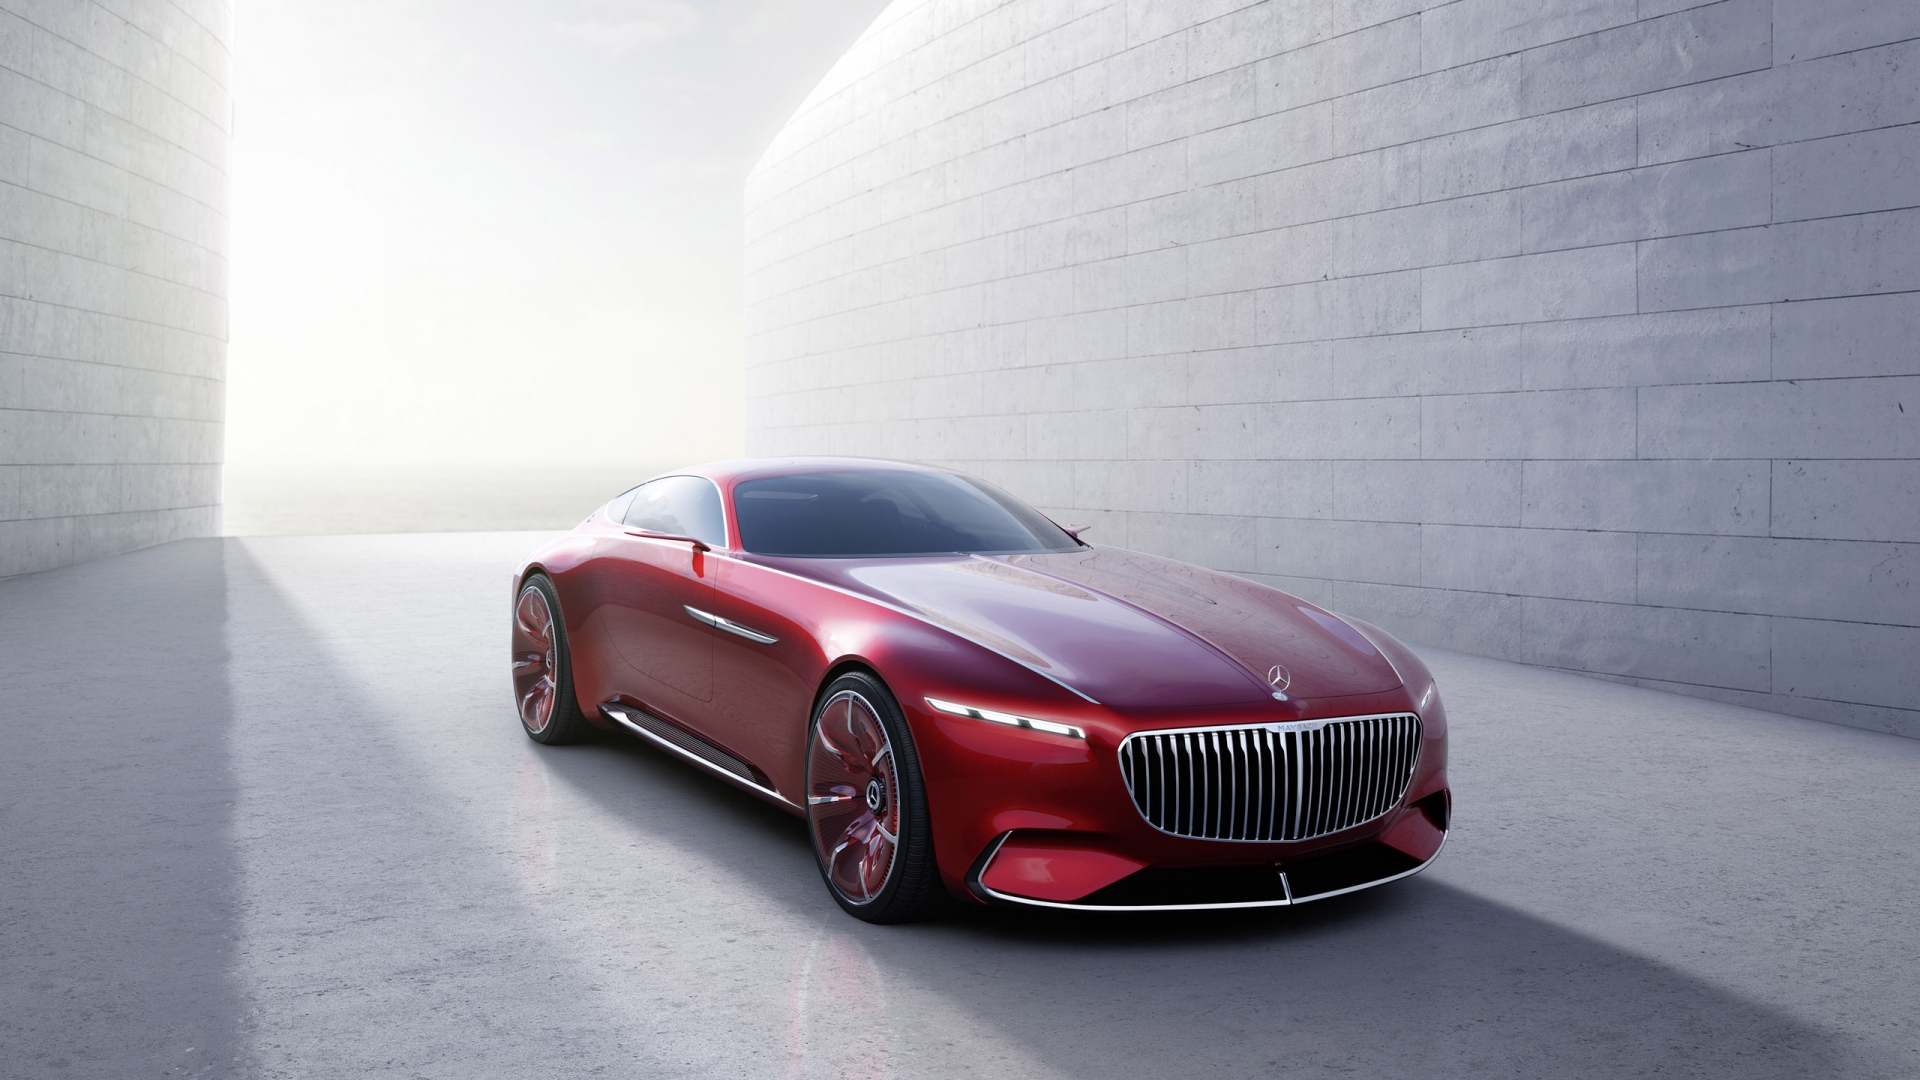 Maybach 6 2016 Concept Car for 1920 x 1080 HDTV 1080p resolution